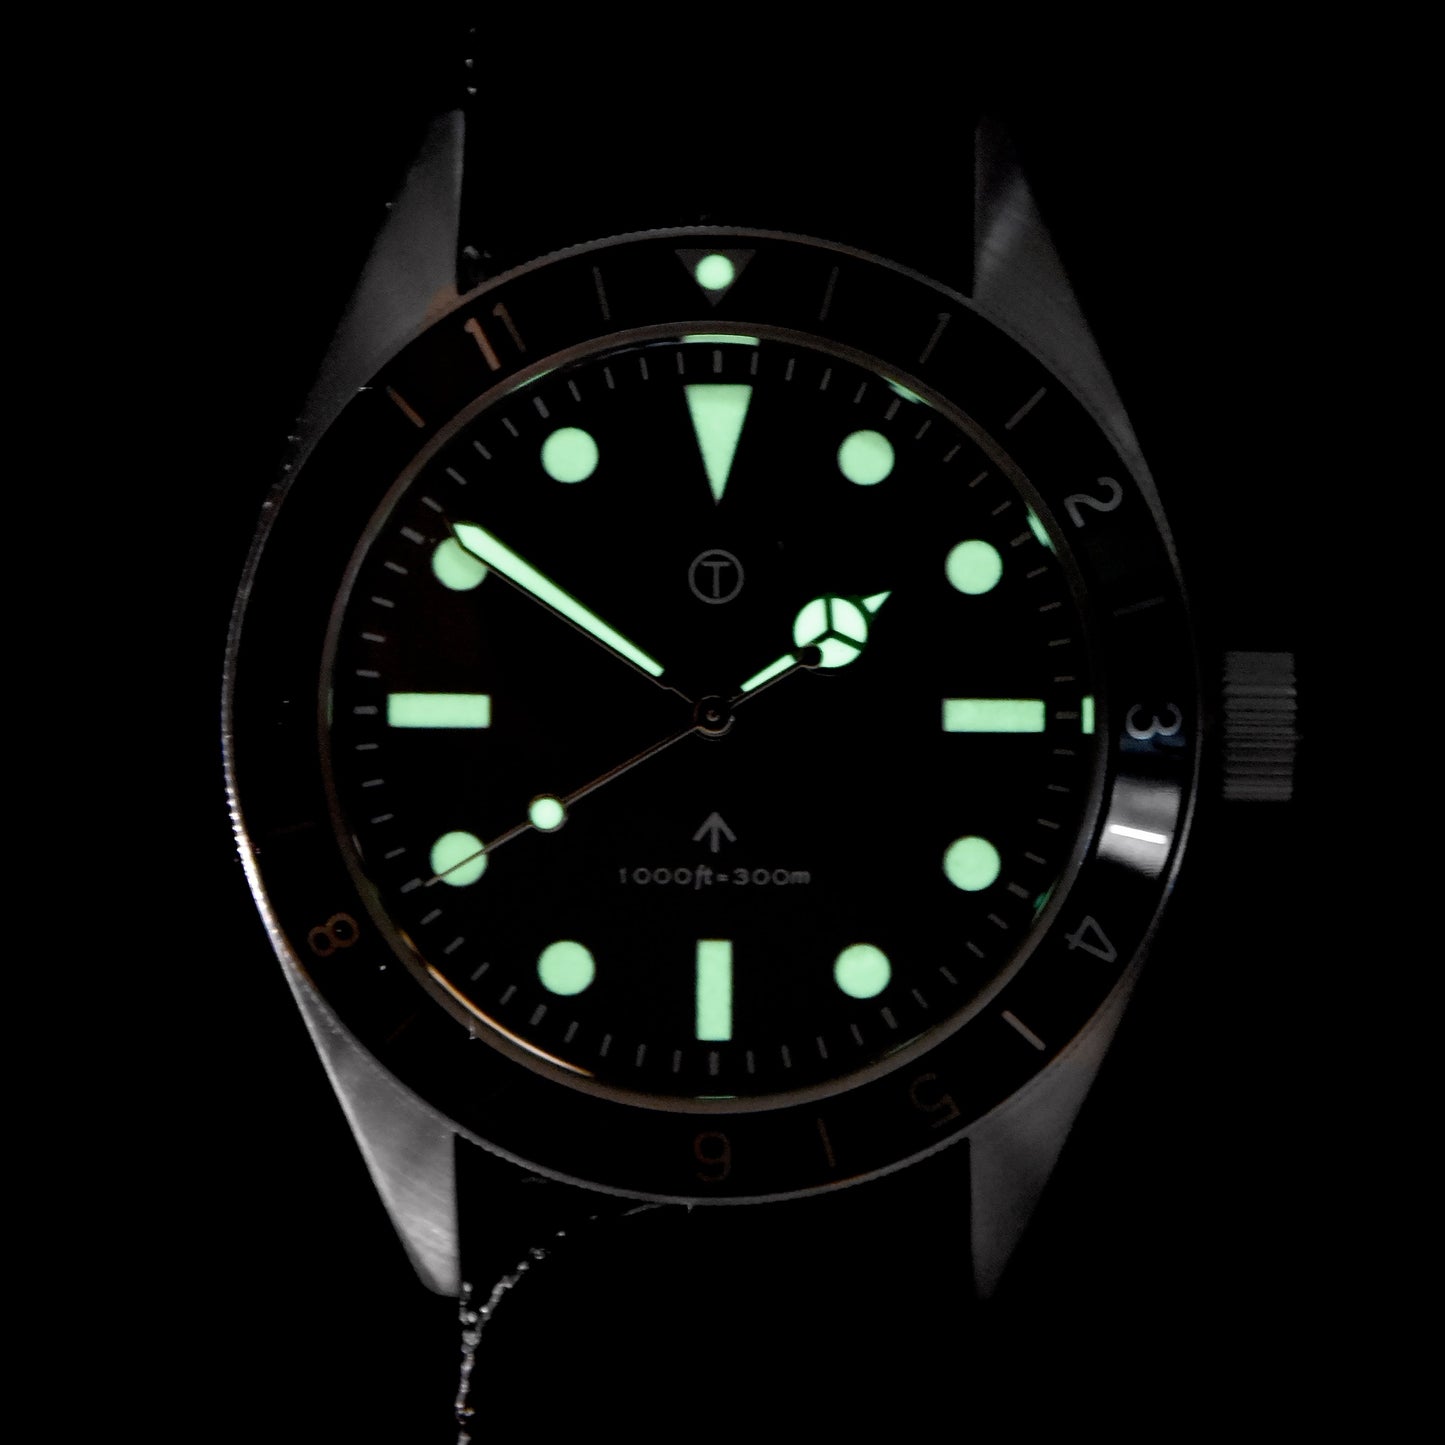 MWC Classic 1960s Pattern Divers Watch with Retro Luminous Paint and a Hybrid Mechanical/Quartz Movement